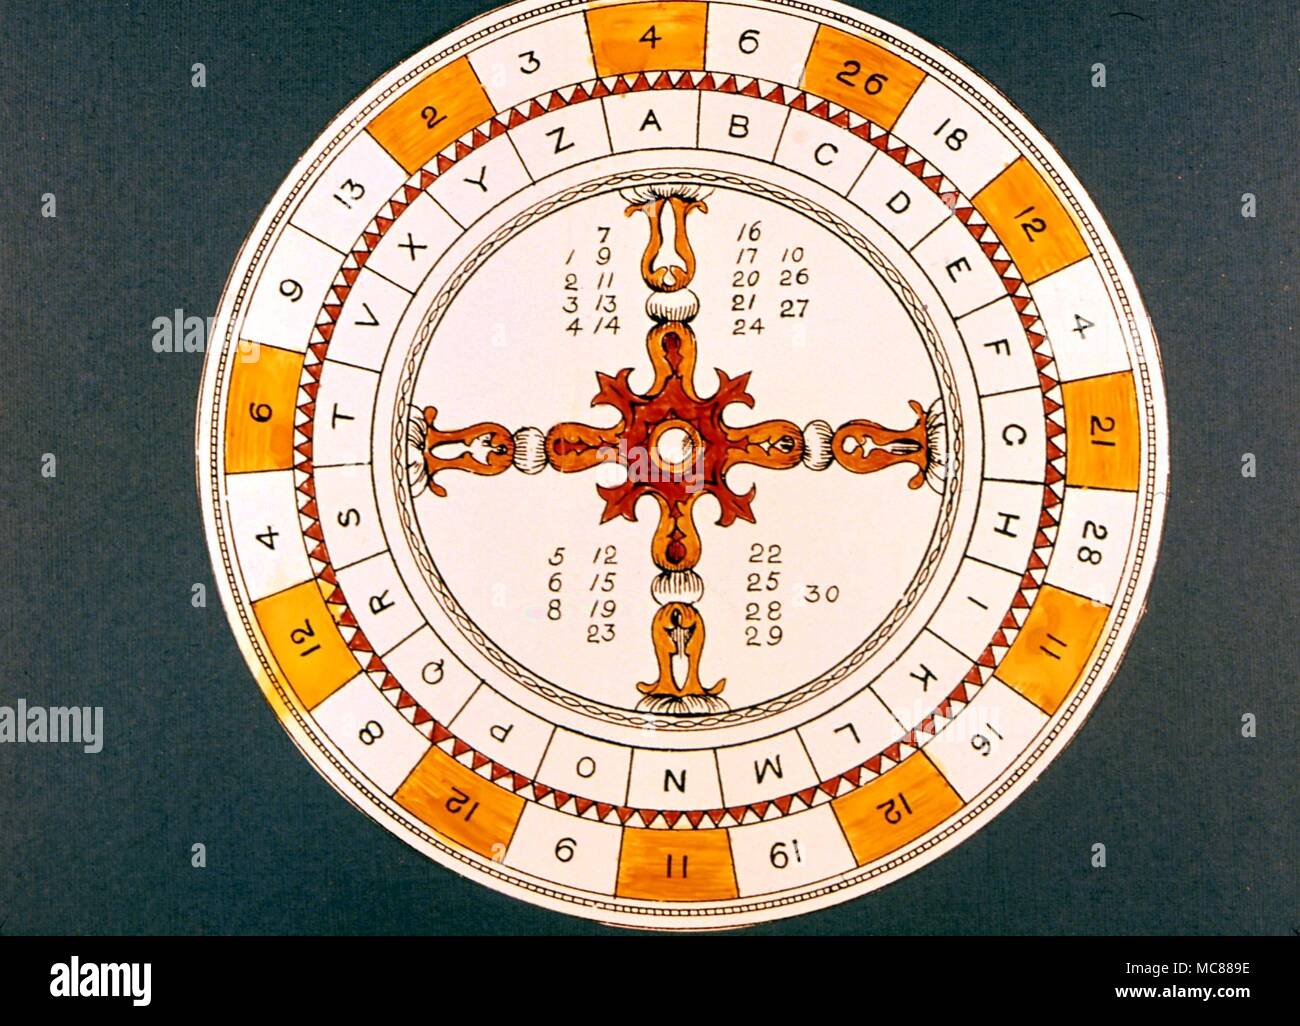 Wheel of Fortune Simple Wheel of Fortune - a volvelle for simple prediction by means of letters and numbers Stock Photo